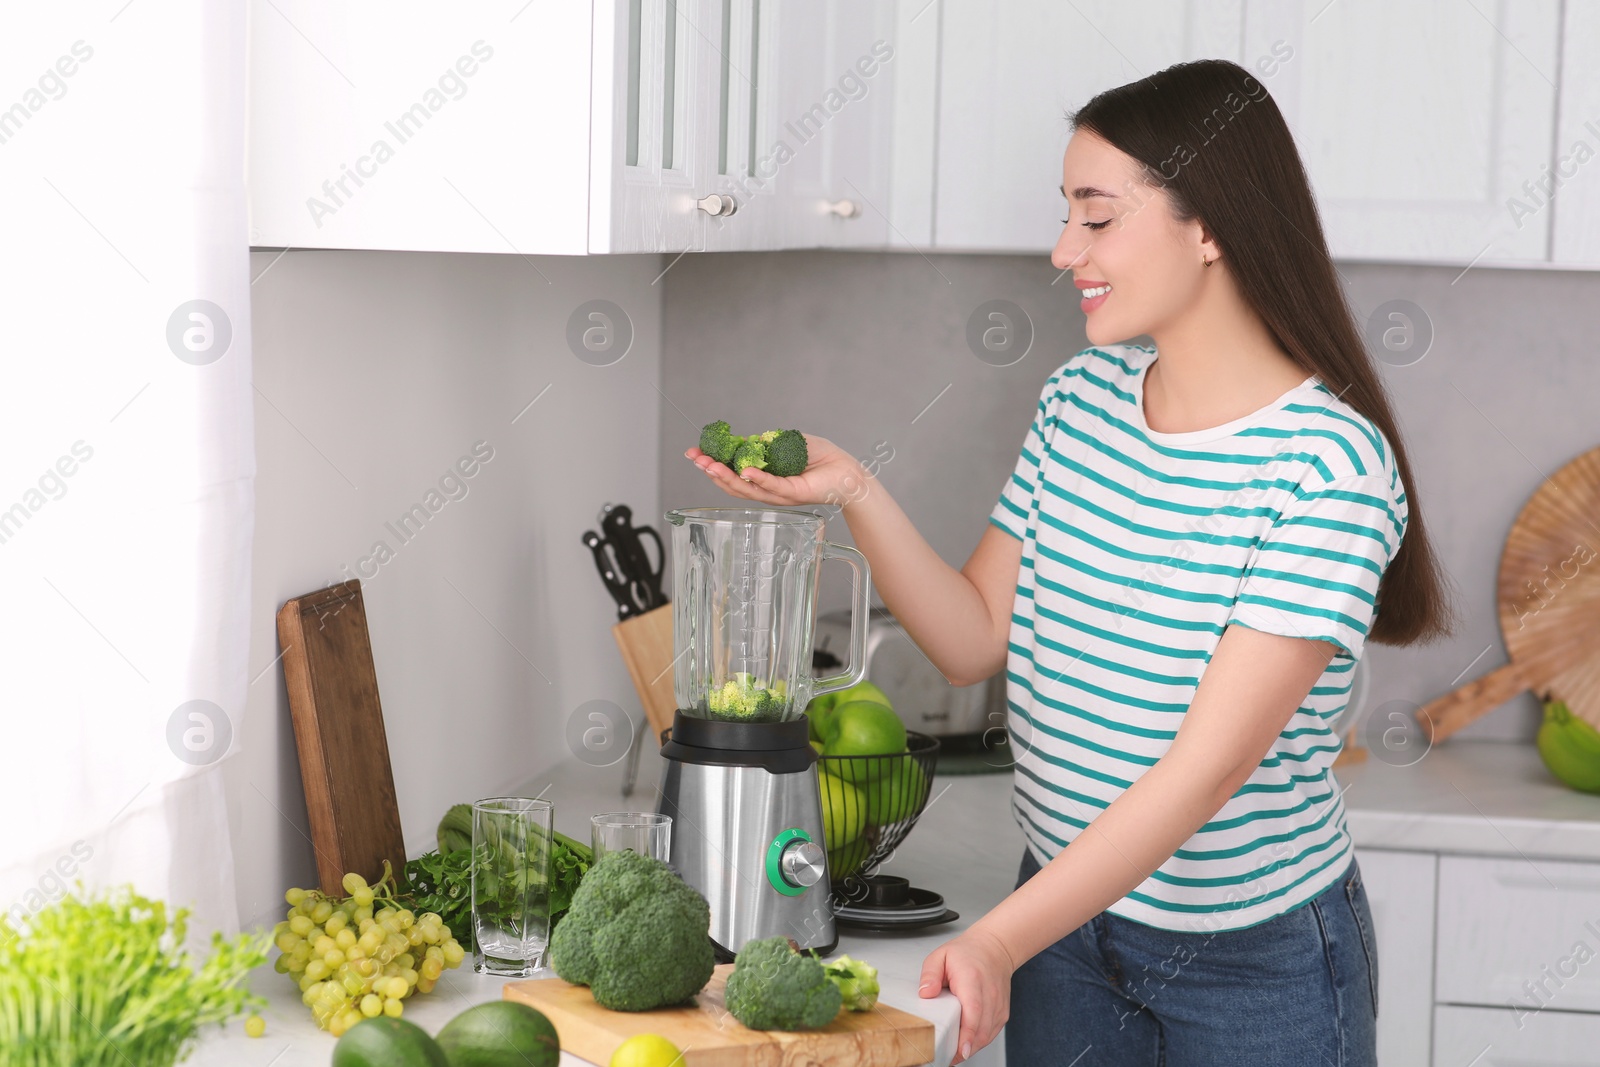 Photo of Woman adding broccoli into blender for smoothie in kitchen